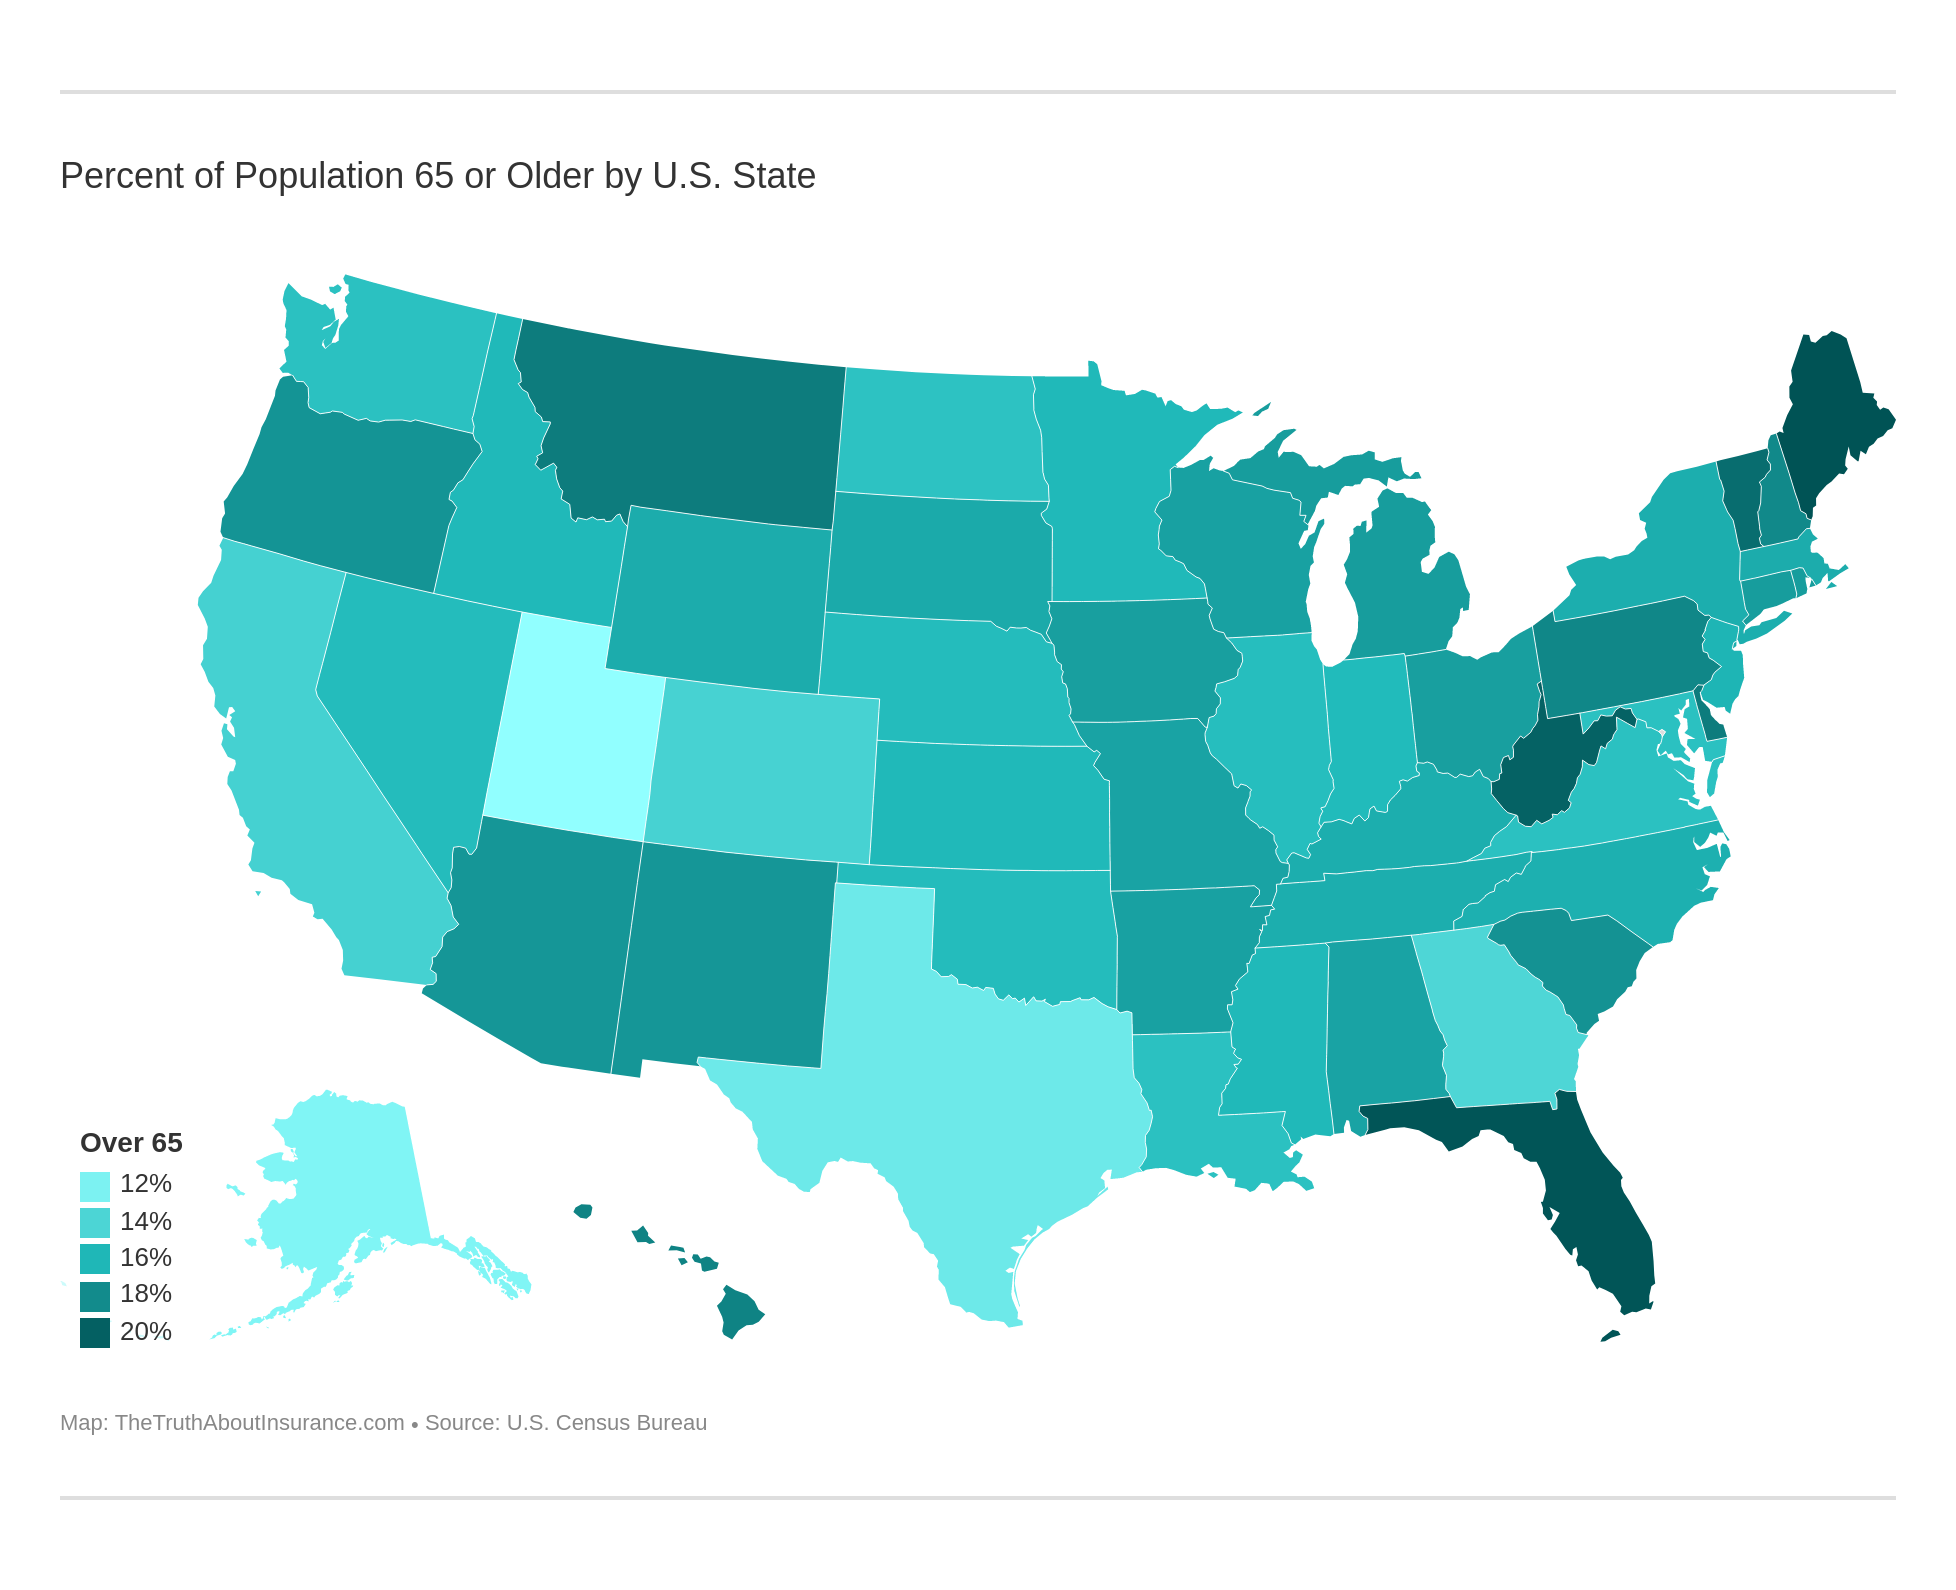 Percent of Population 65 or Older by U.S. State